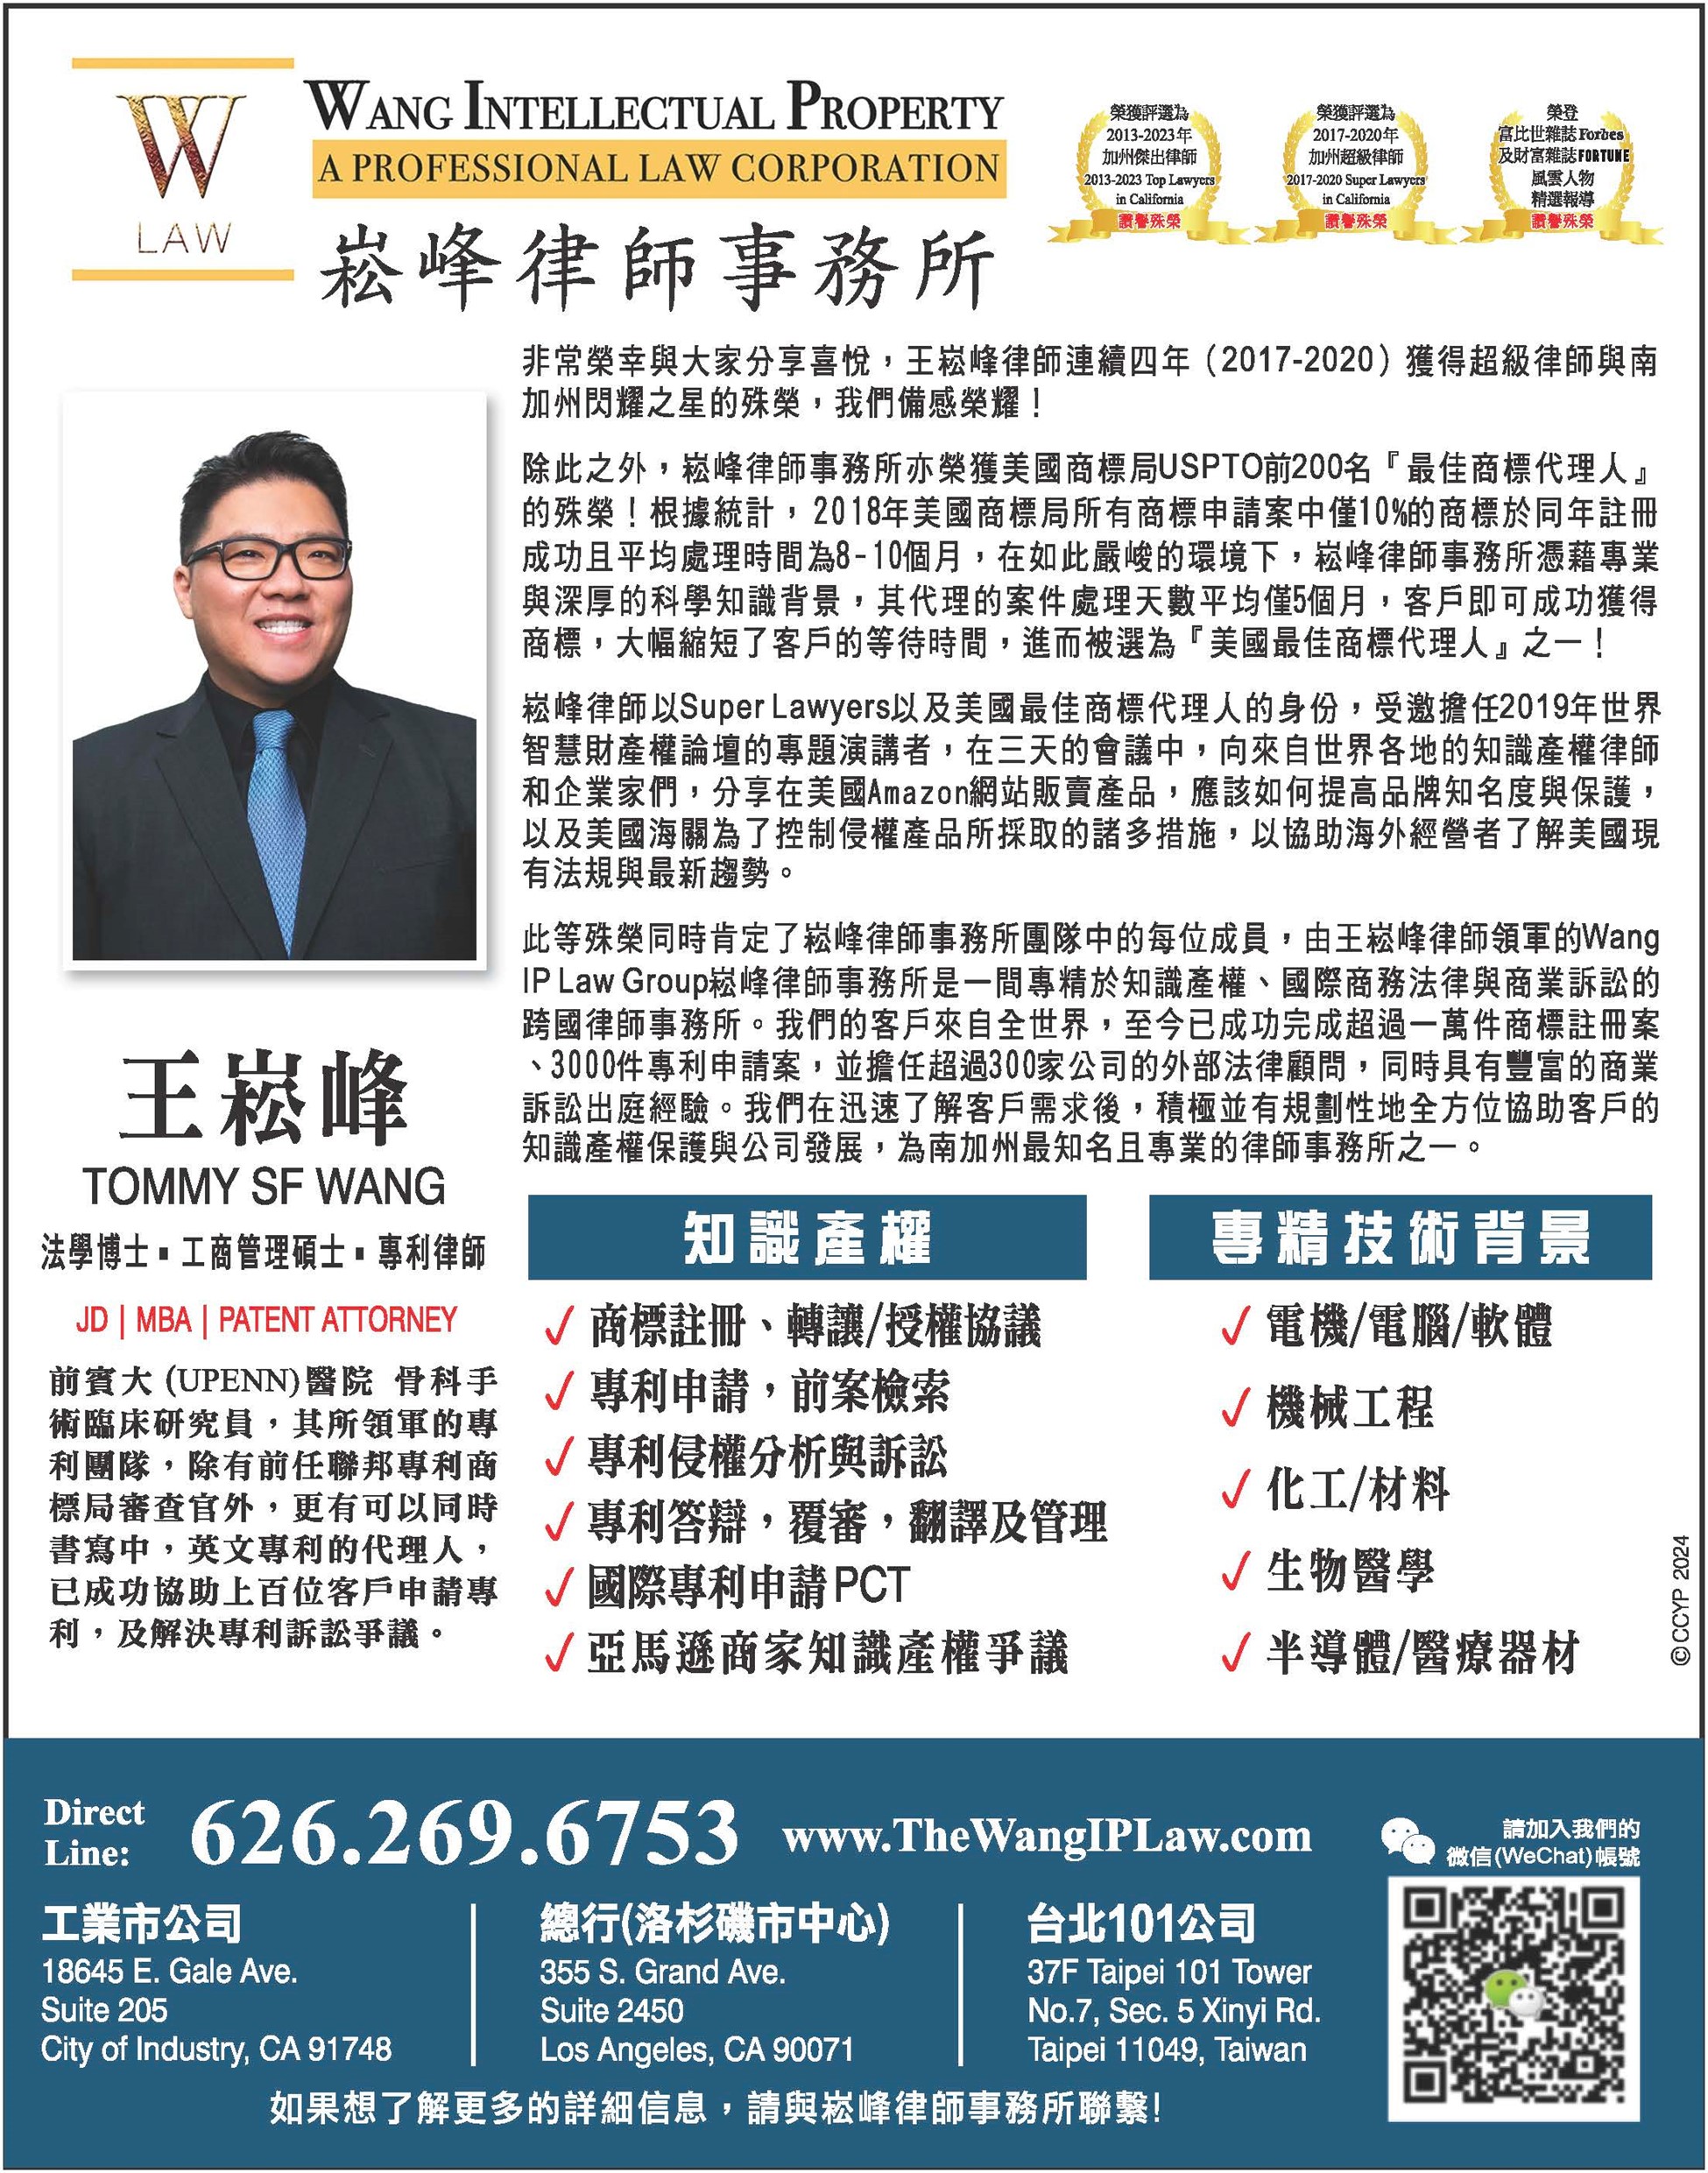 Wang Intellectual Property | A Professional Law Corporation | Tommy SF Wang